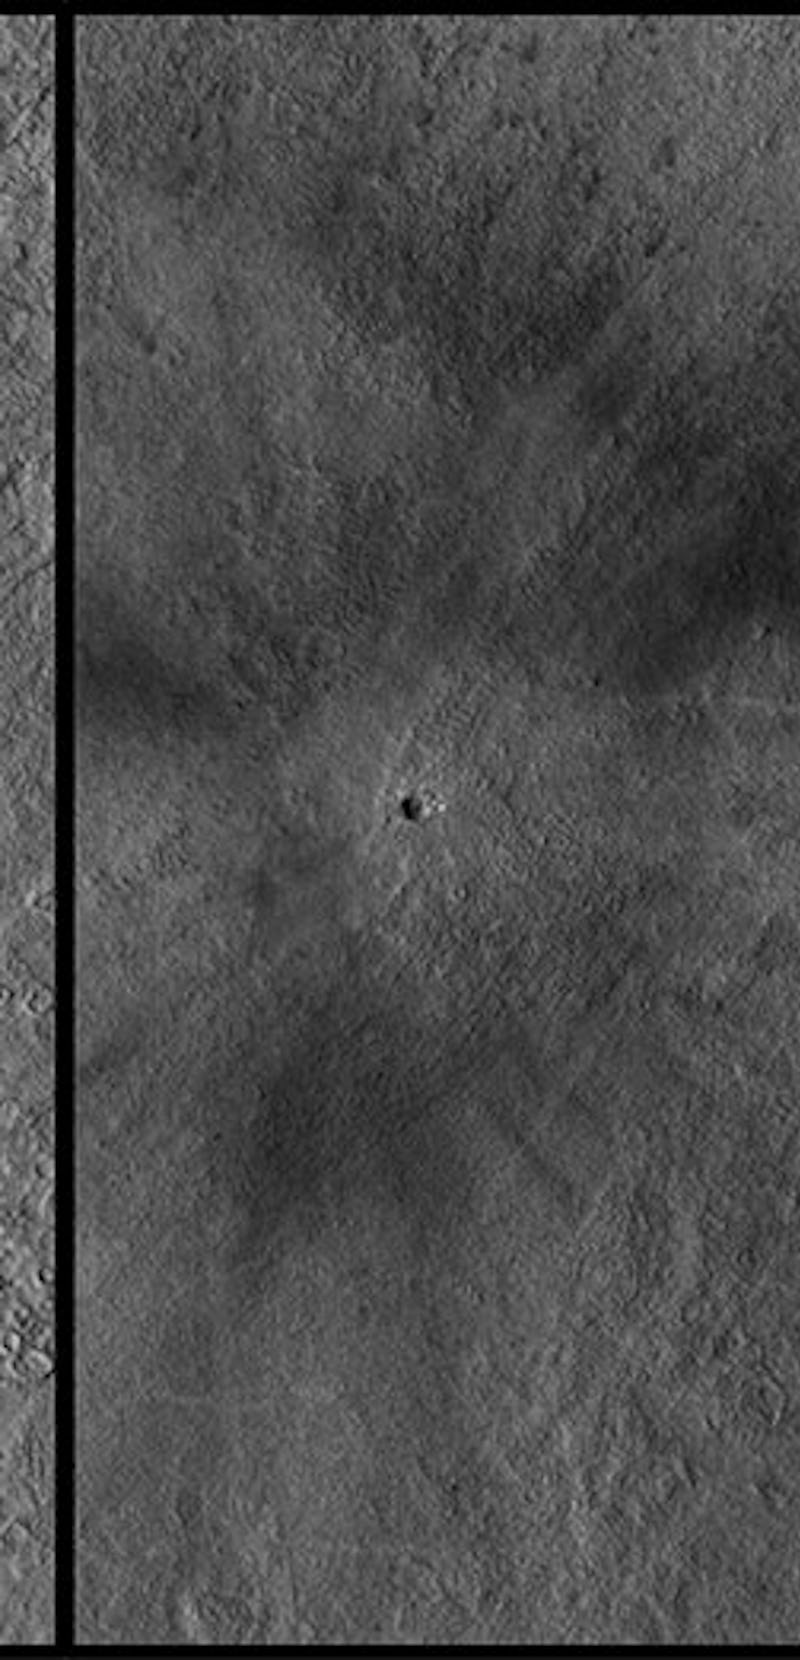 This meteoroid impact crater on Mars was discovered using the black-and-white Context Camera aboard ...